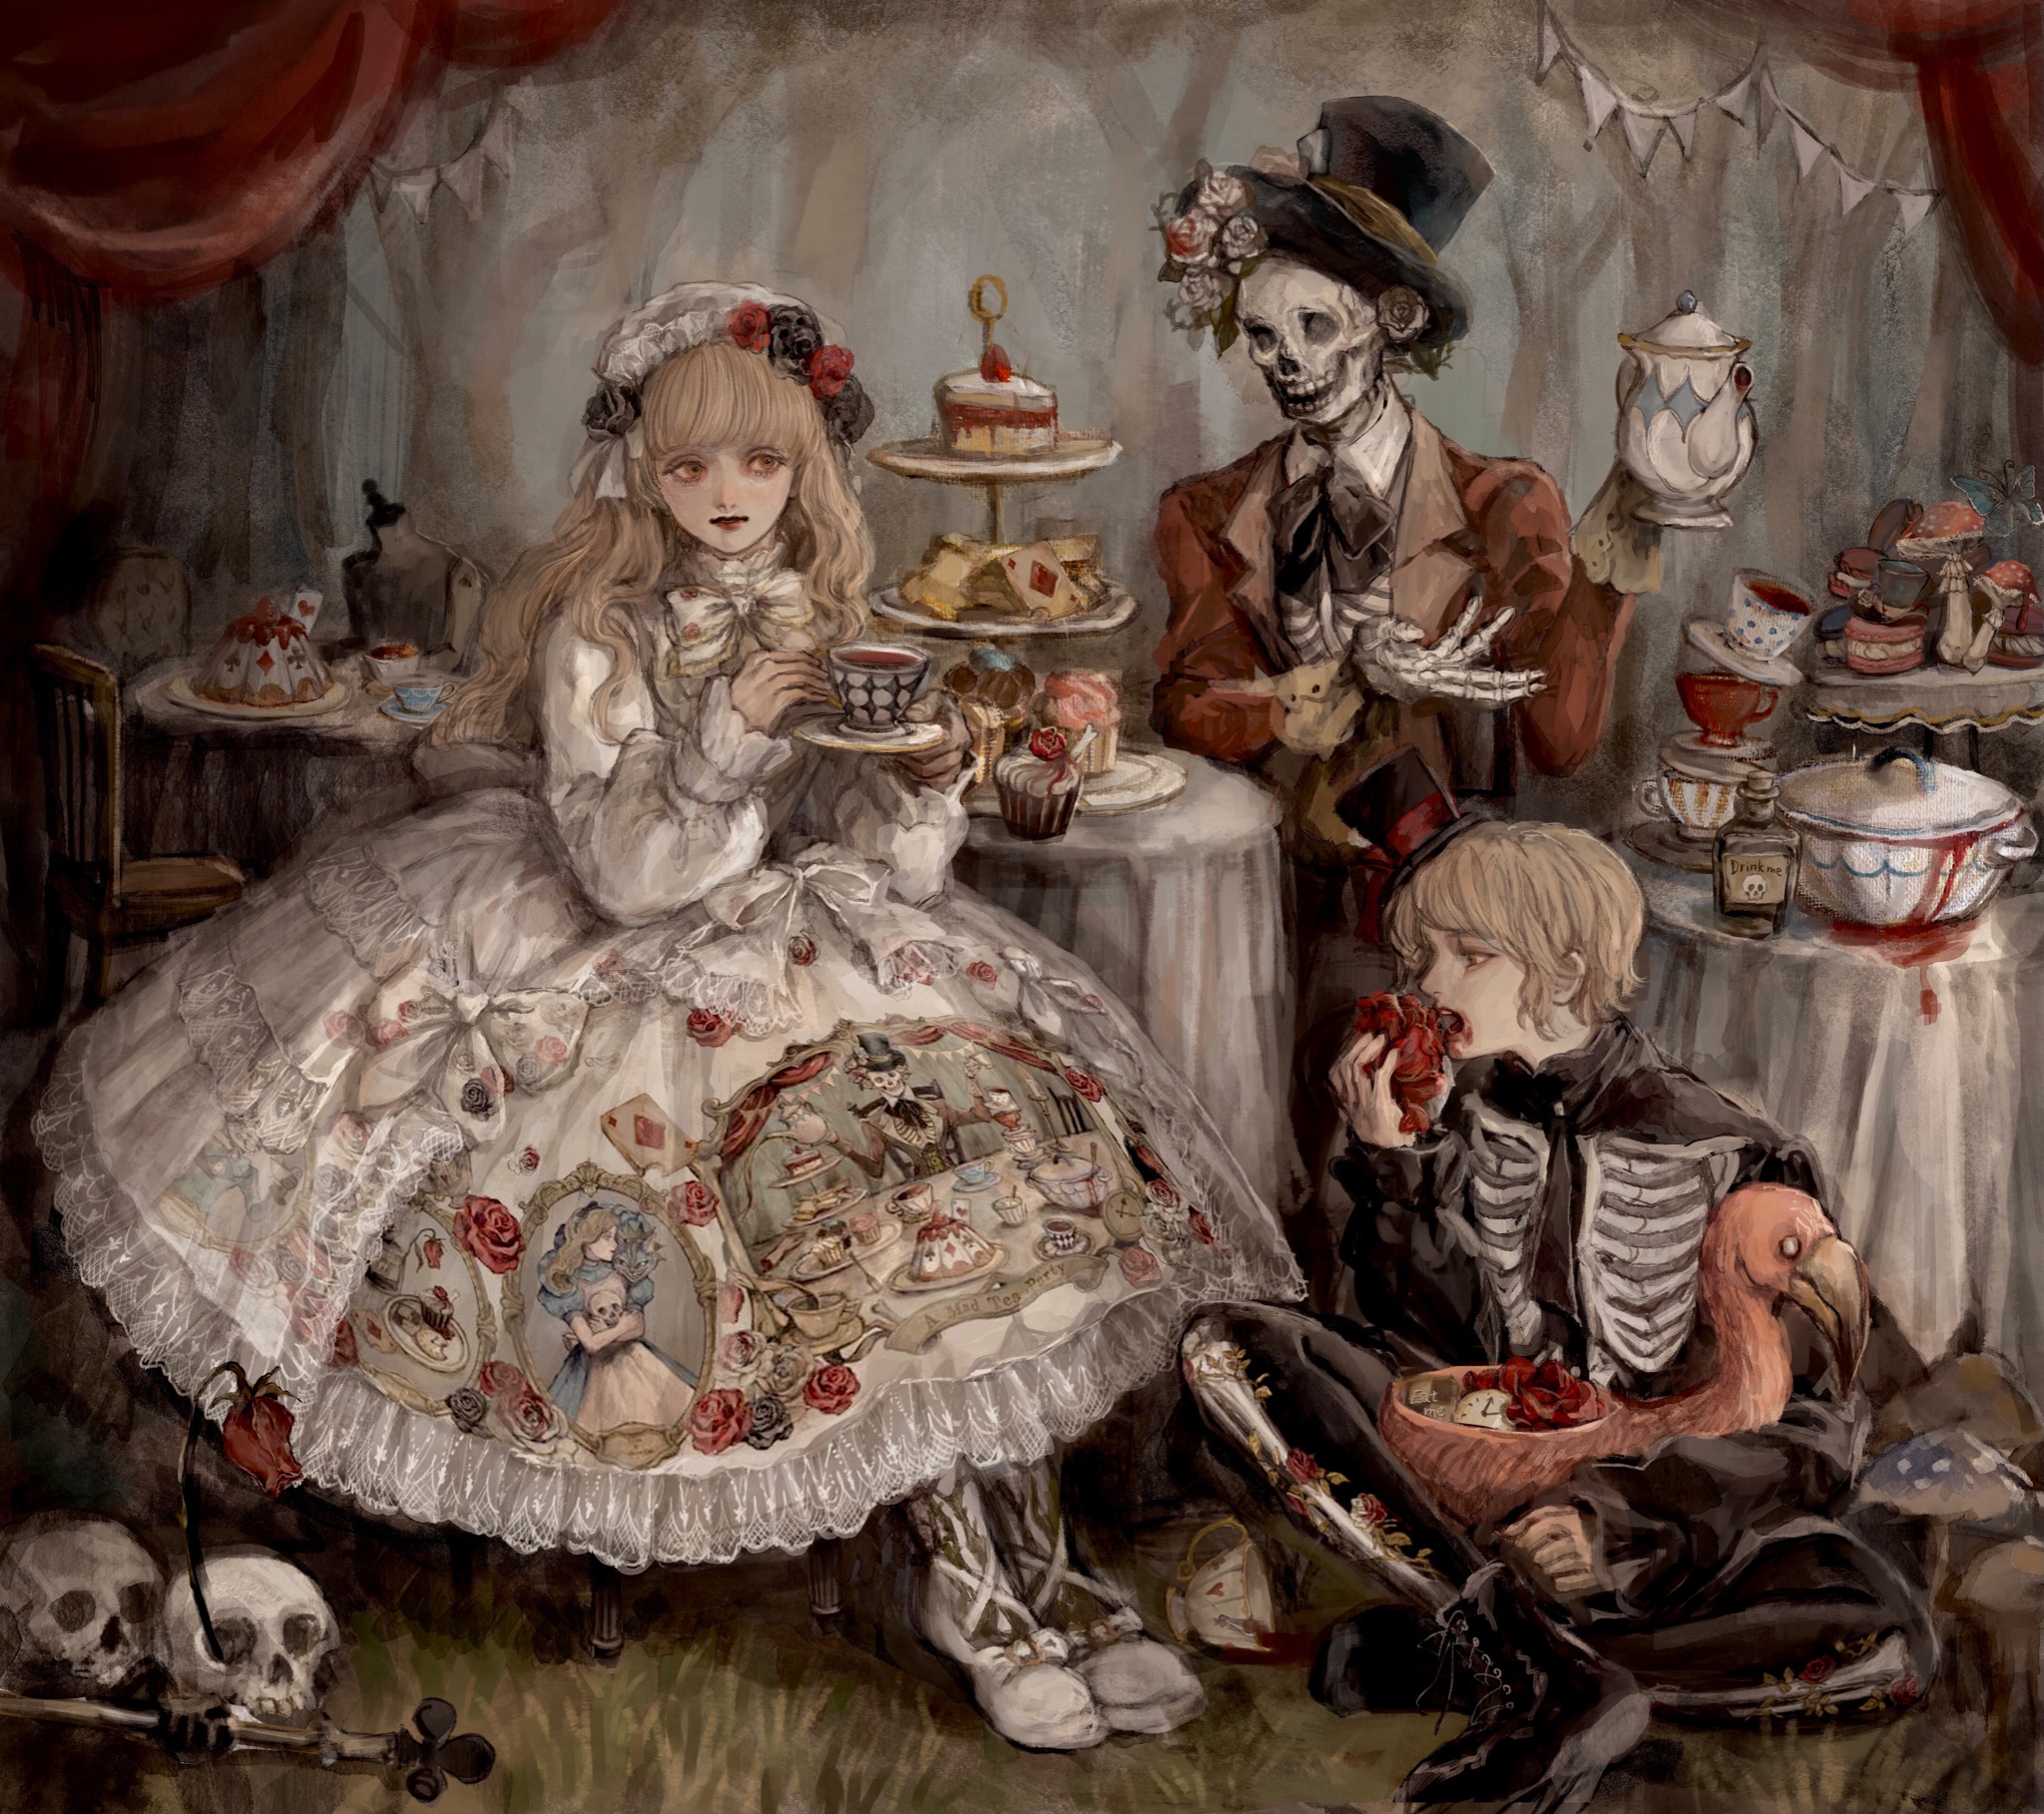 Madhatter's Tea Party ・まくら くらまコラボ ドレス paymentsway.co